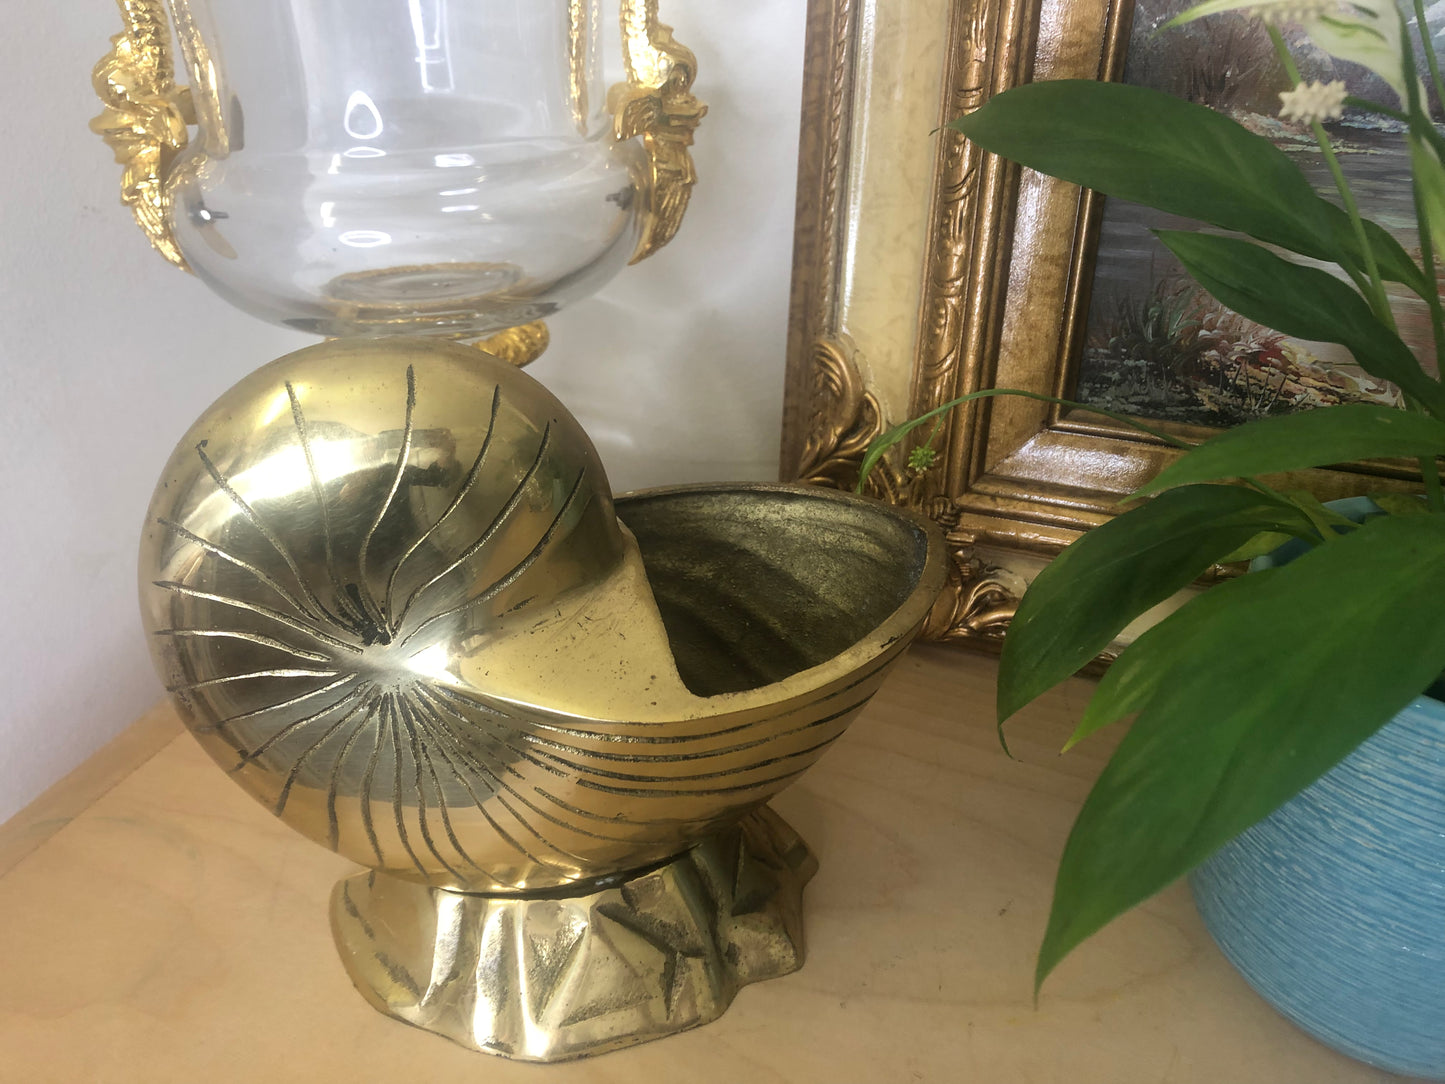 Gorgeous Hollywood Regency Brass Shell Planter- Excellent Condition!